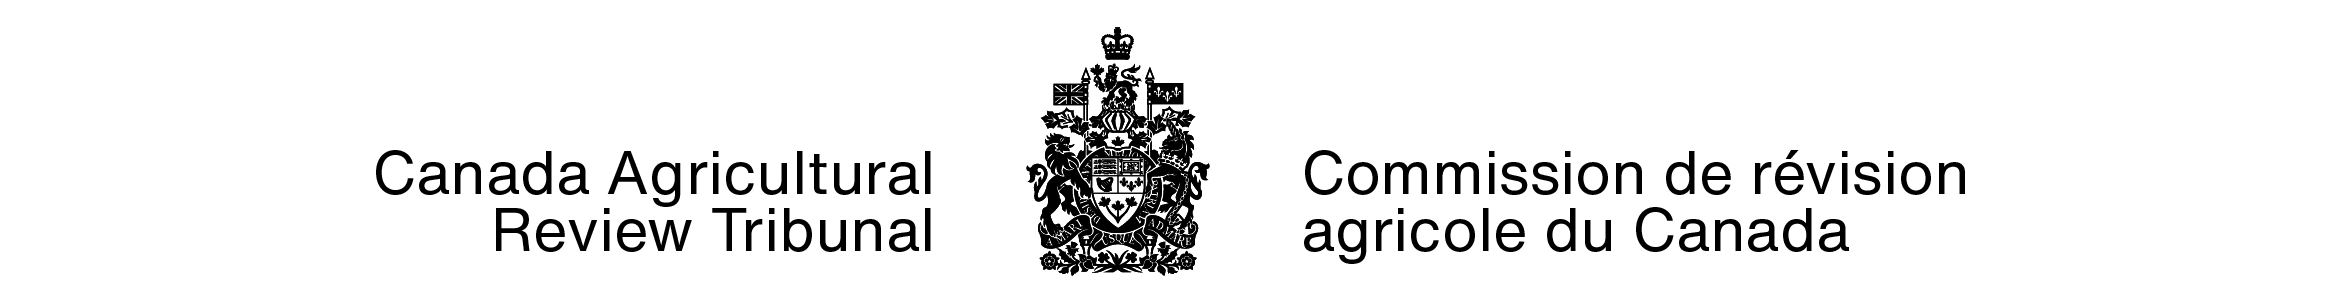 Arms signature for the Canada Agricultural Review Tribunal in its standard colours (black arms of Canada, black type)